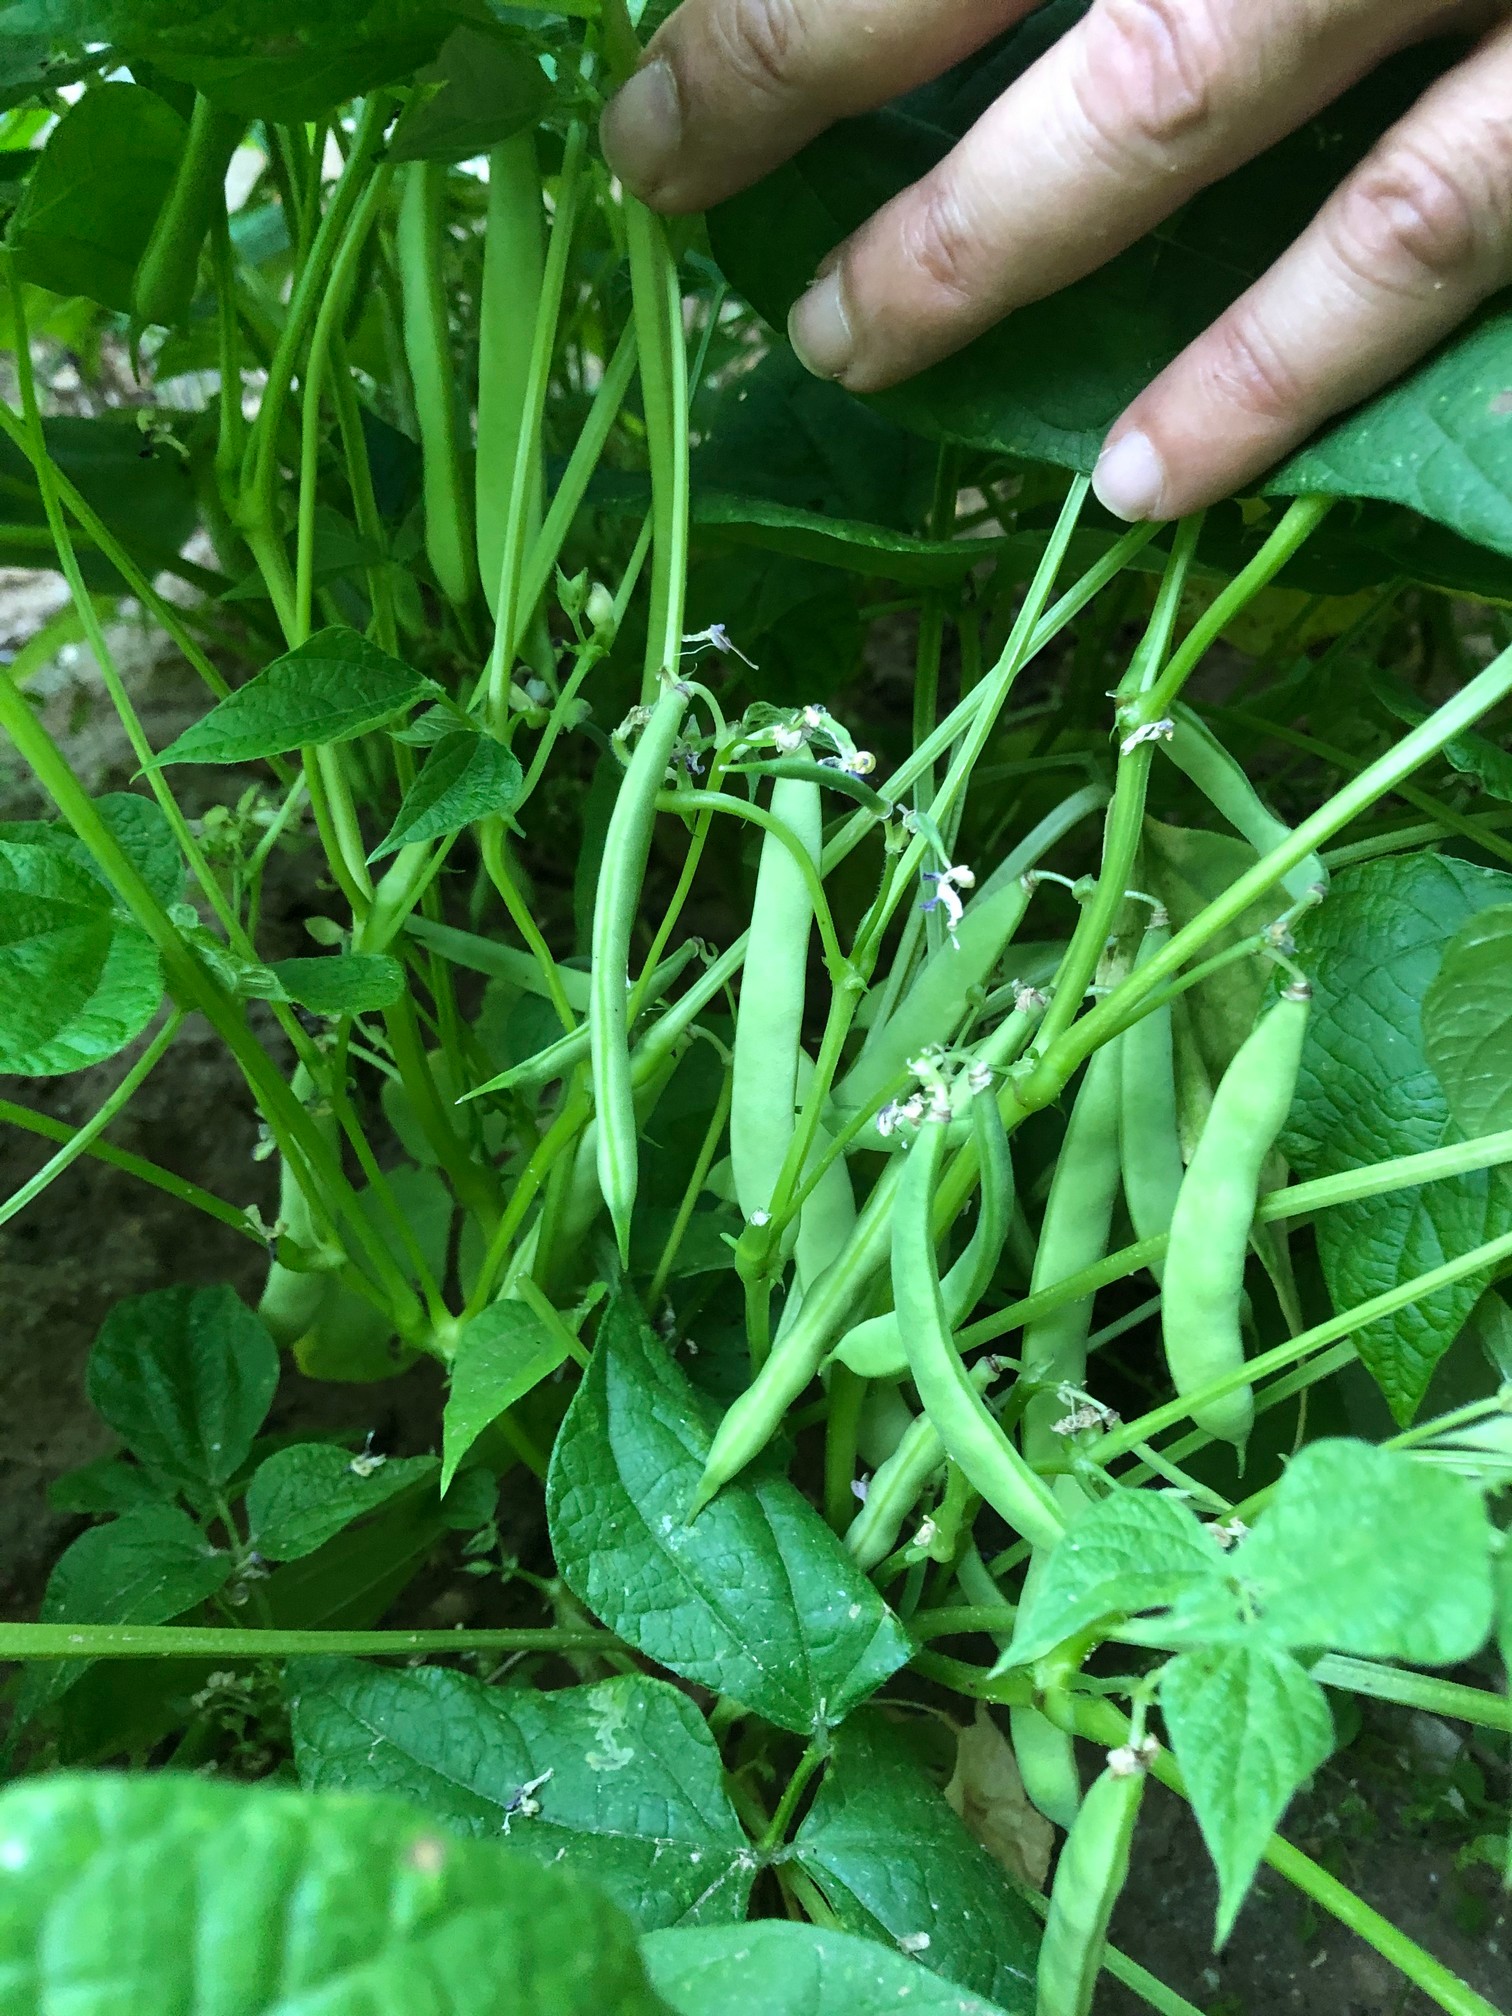 Once established, black turtle beans don’t need supplemental fertilizer as they fix their own nitrogen.